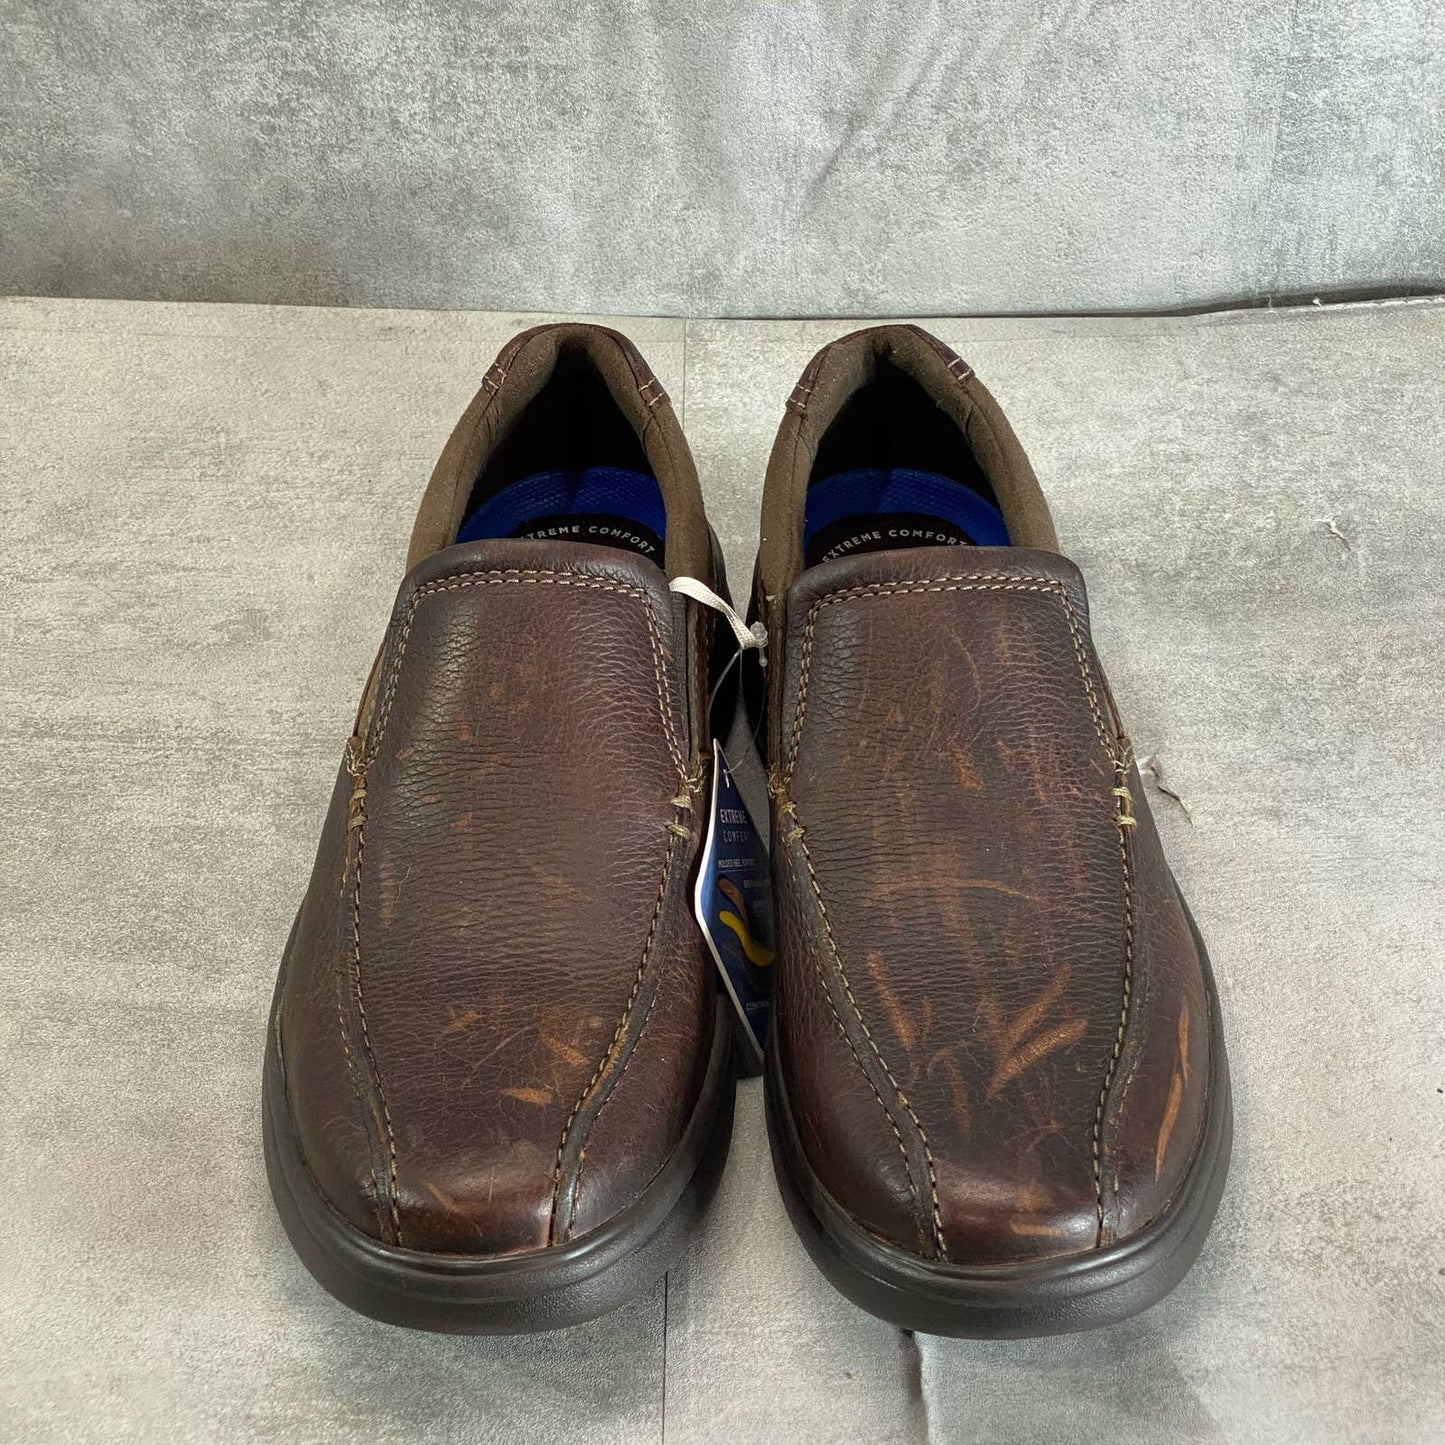 CLARKS Men's Brown Tumbled Extra Comfort Bradley Step Round-Toe Slip-On Loafers SZ 8.5